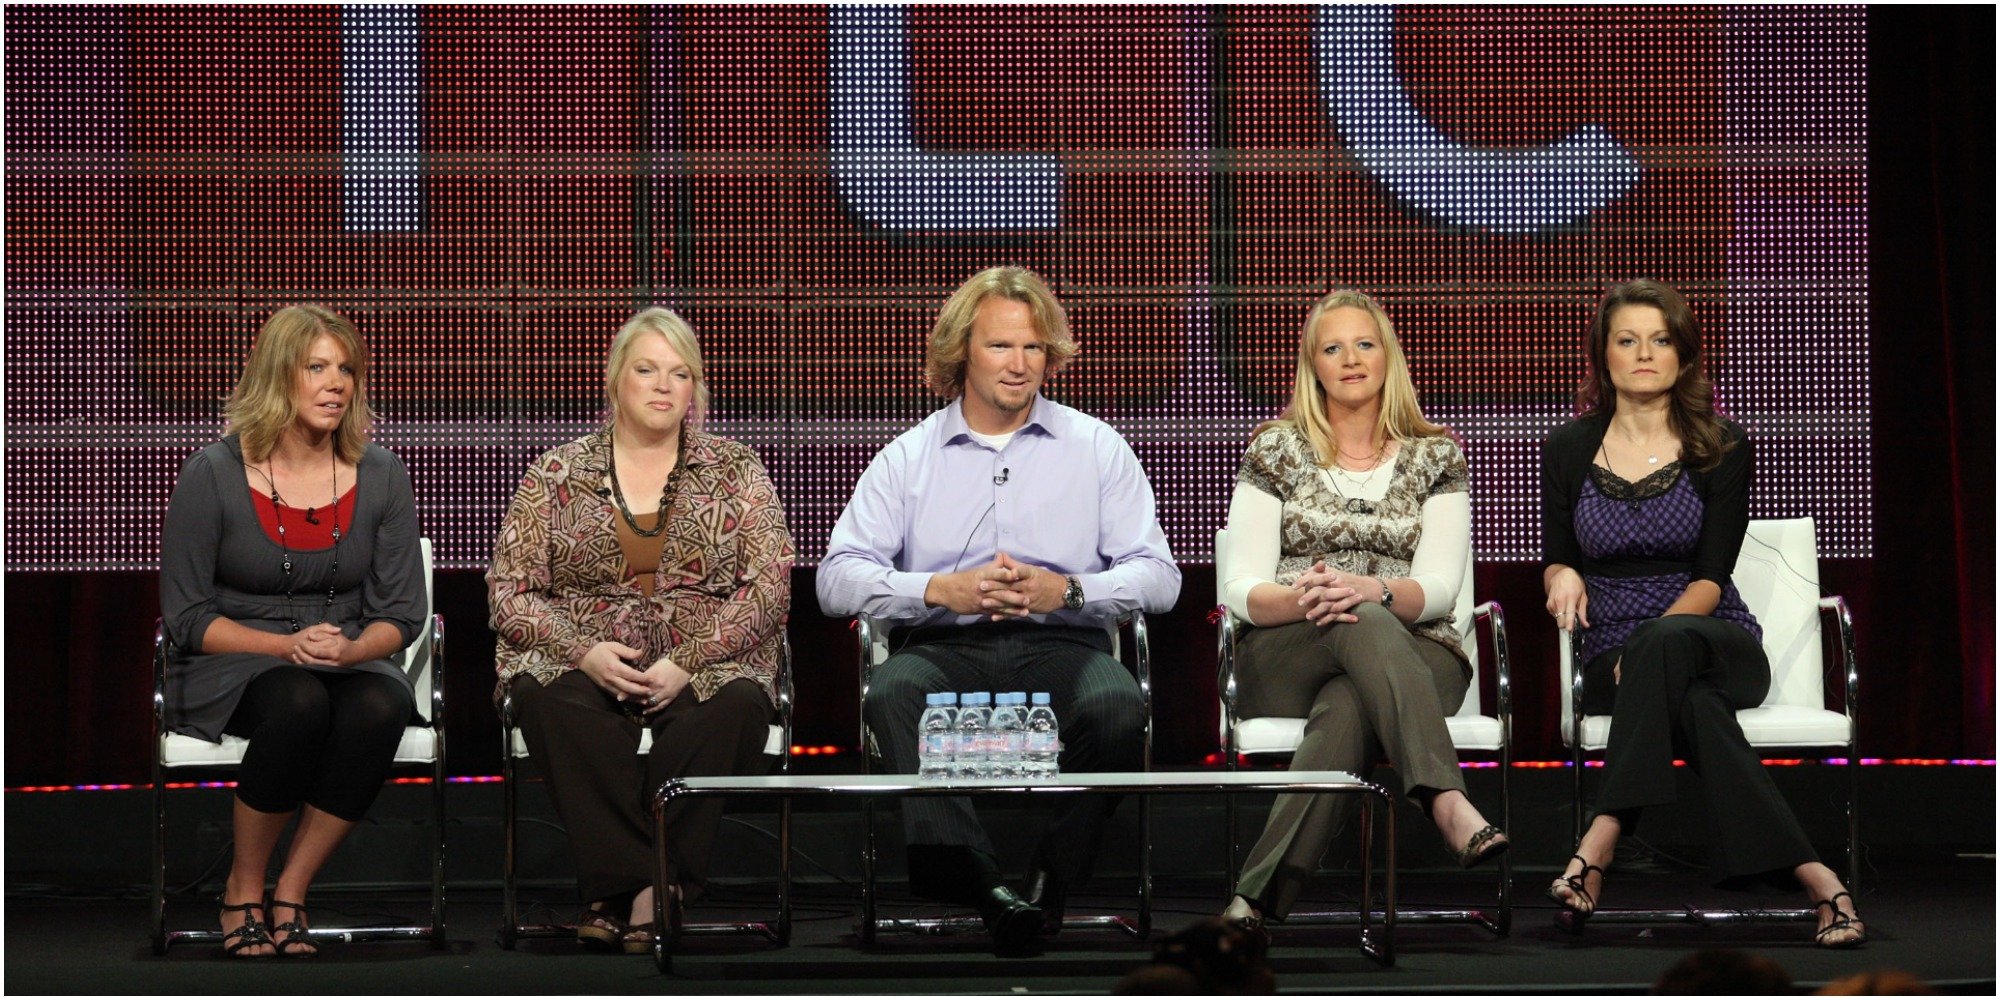 The cast of Sister Wives includes Meri, Janelle, Kody, Christine, and Robyn Brown.